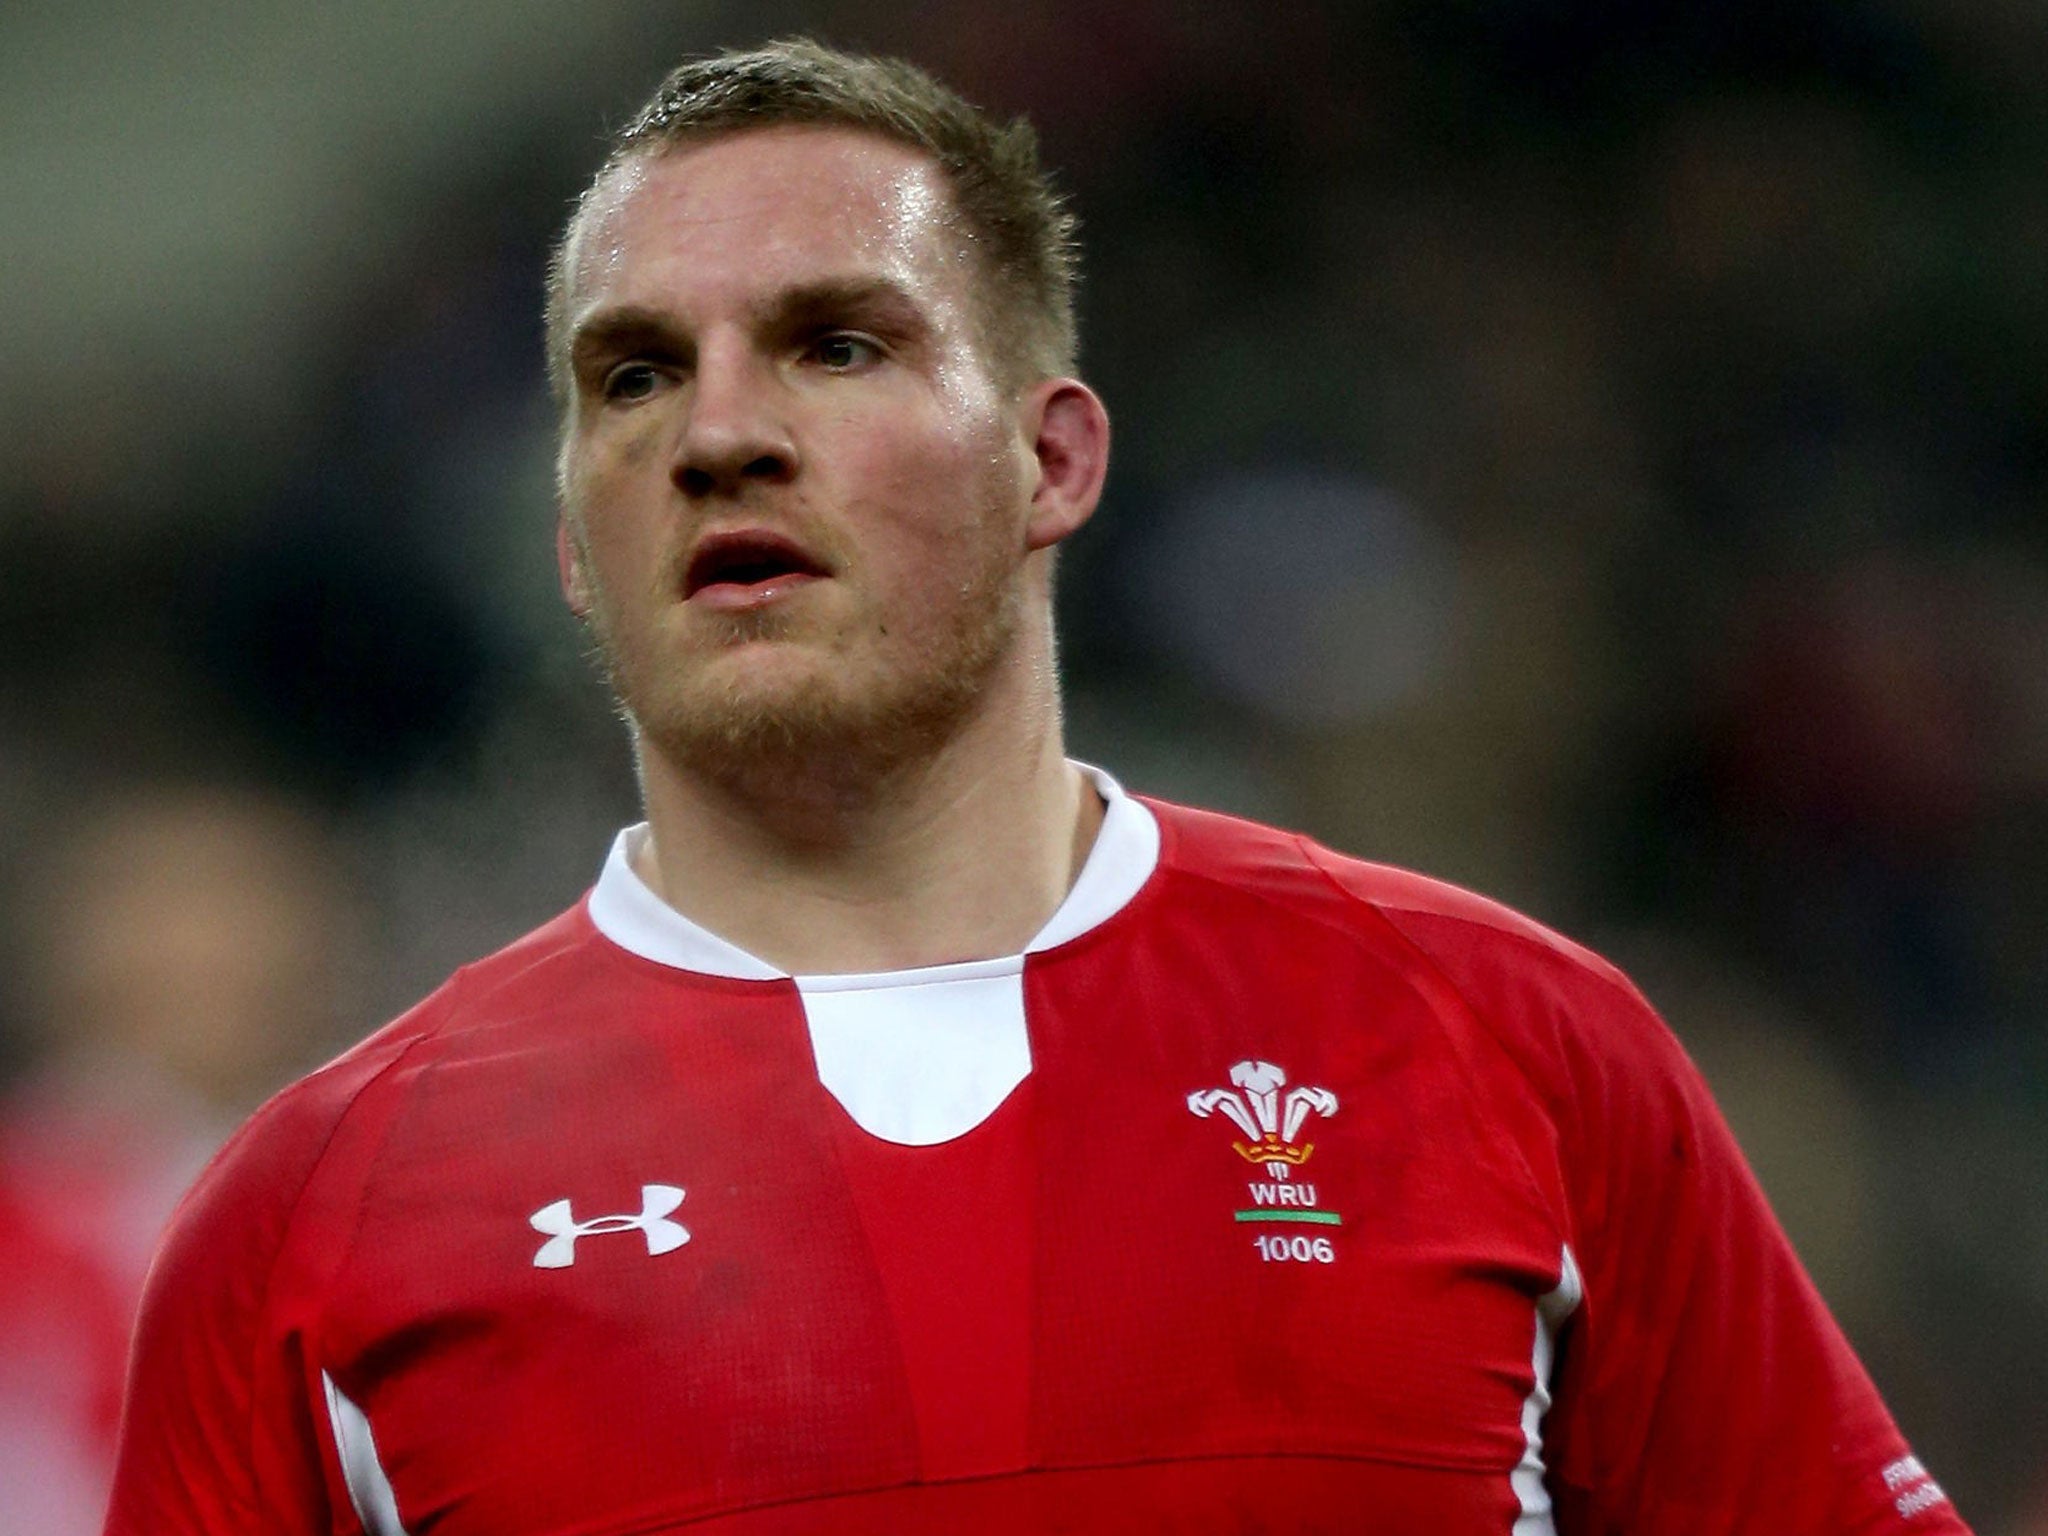 Gethin Jenkins was sent home from the tour of Australia because of a calf problem